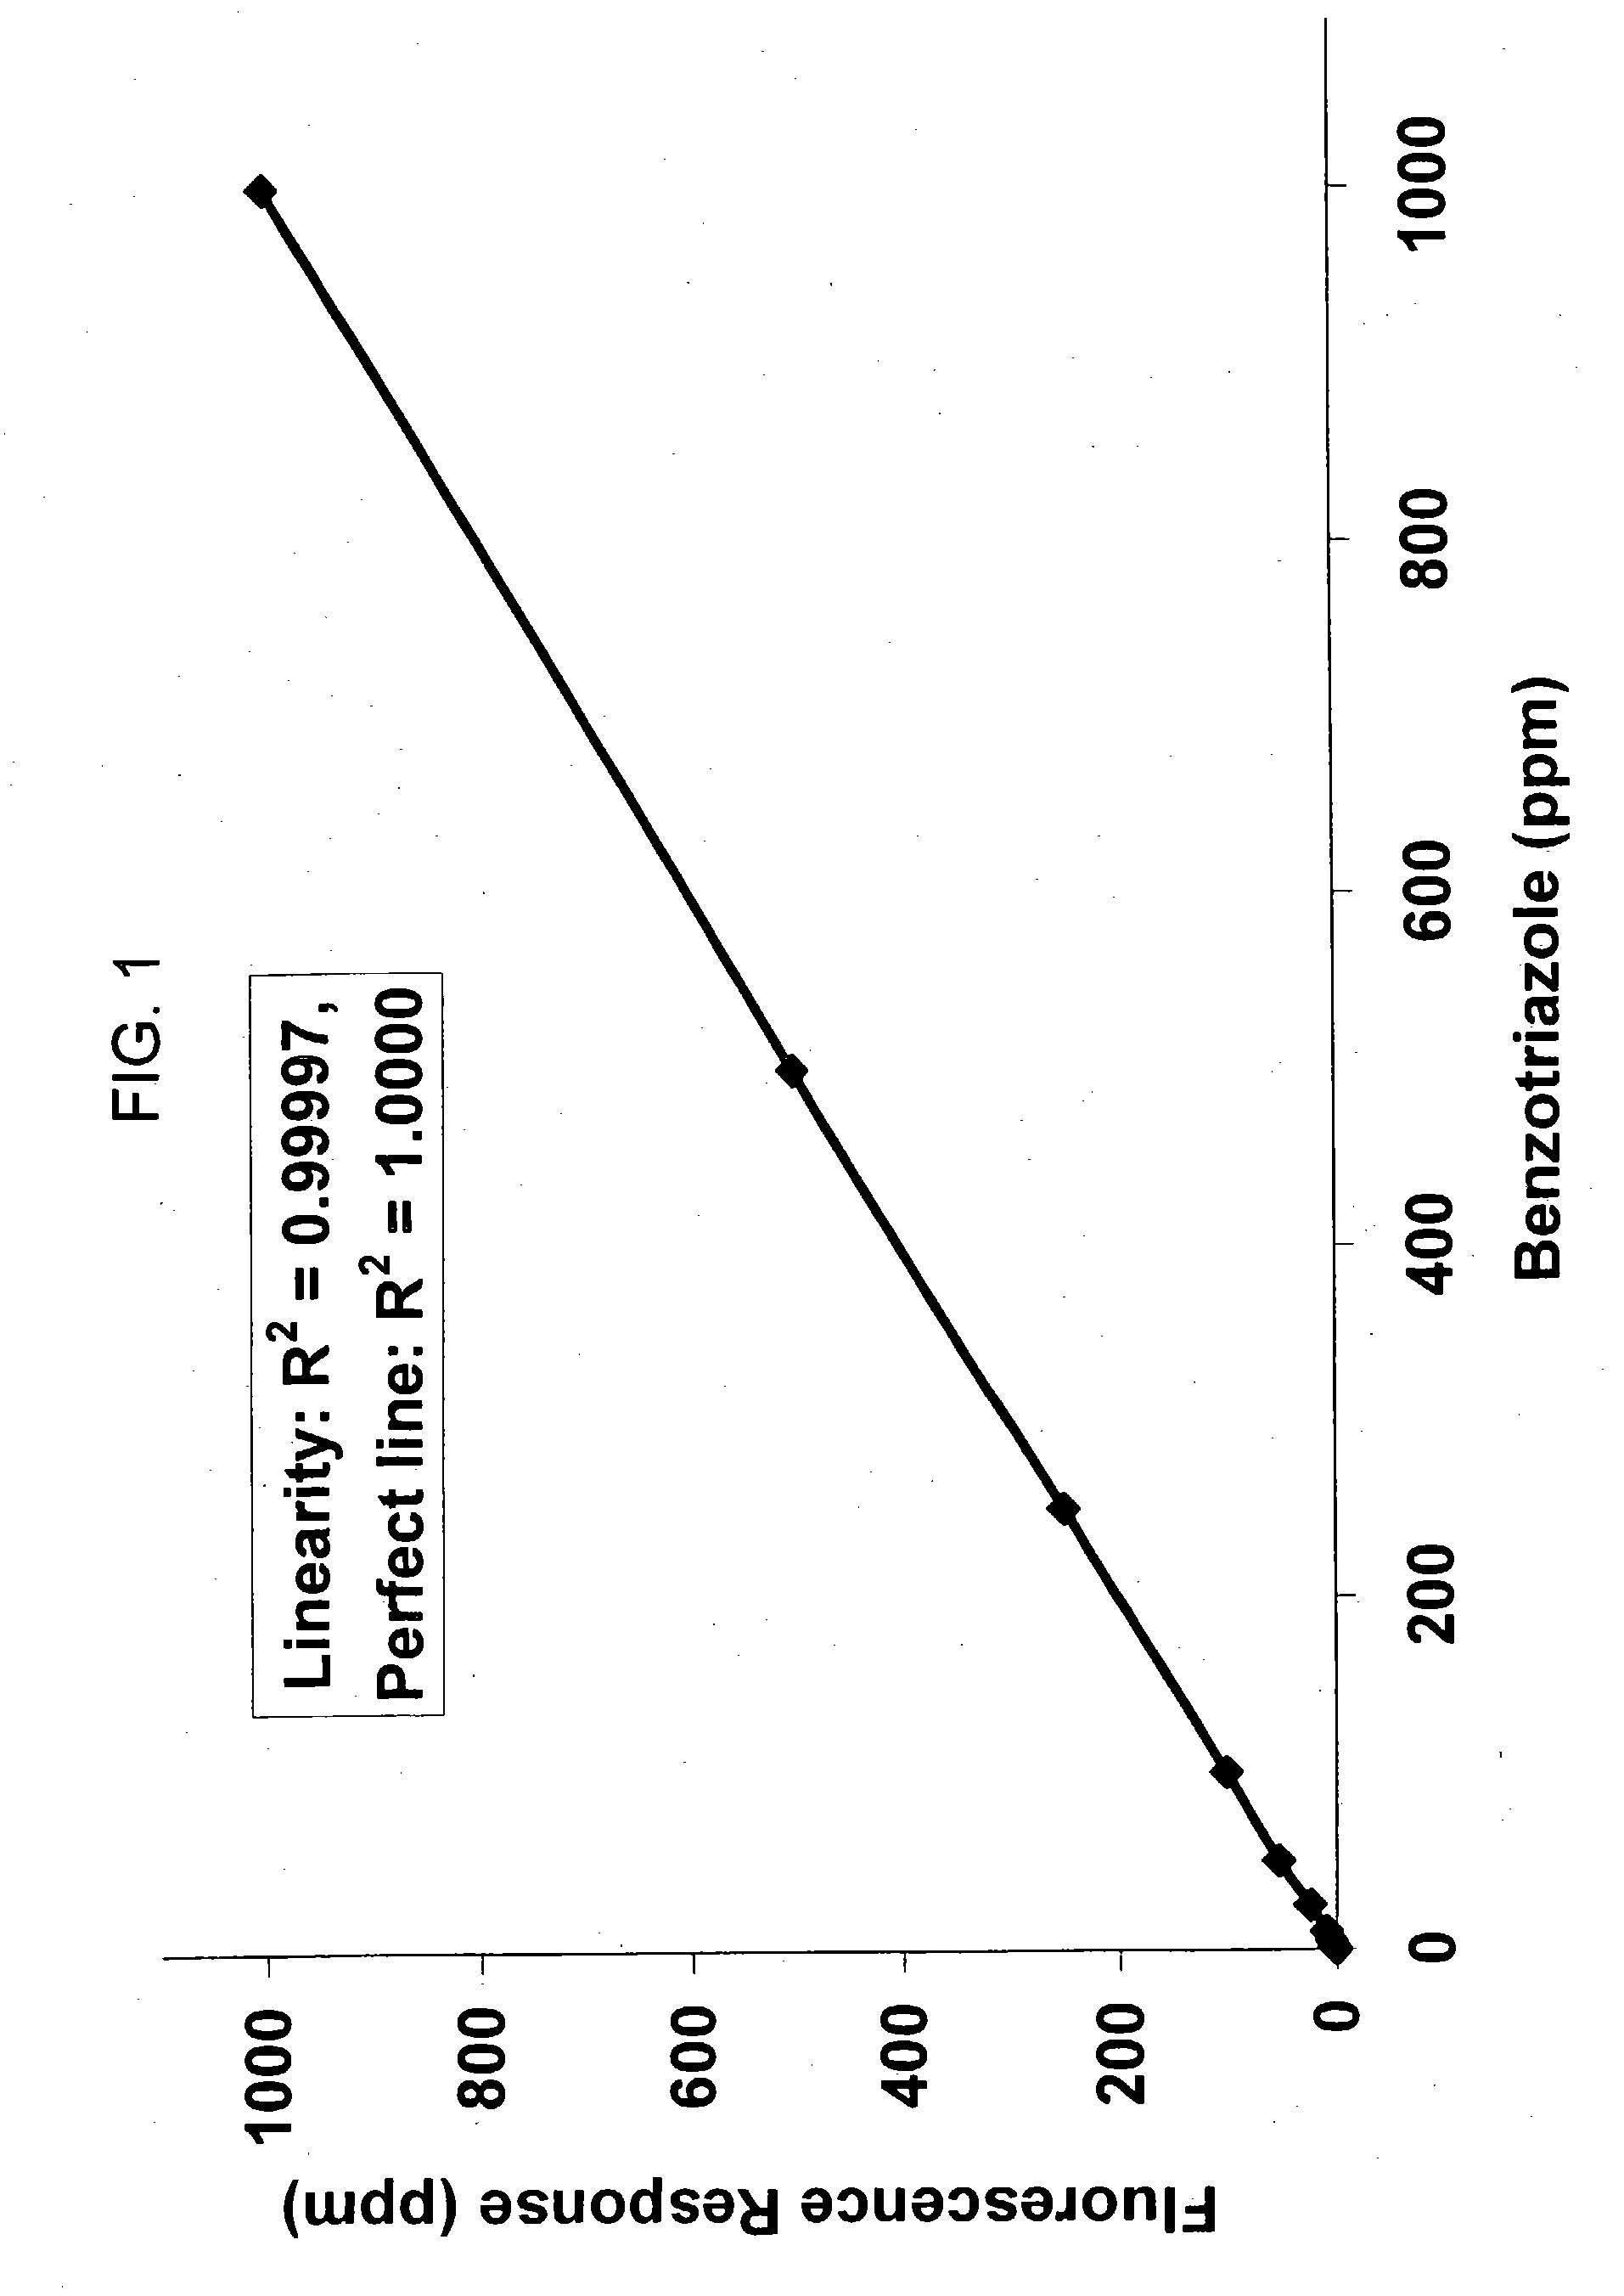 Method of inhibiting corrosion of copper plated or metallized surfaces and circuitry during semiconductor manufacturing processes